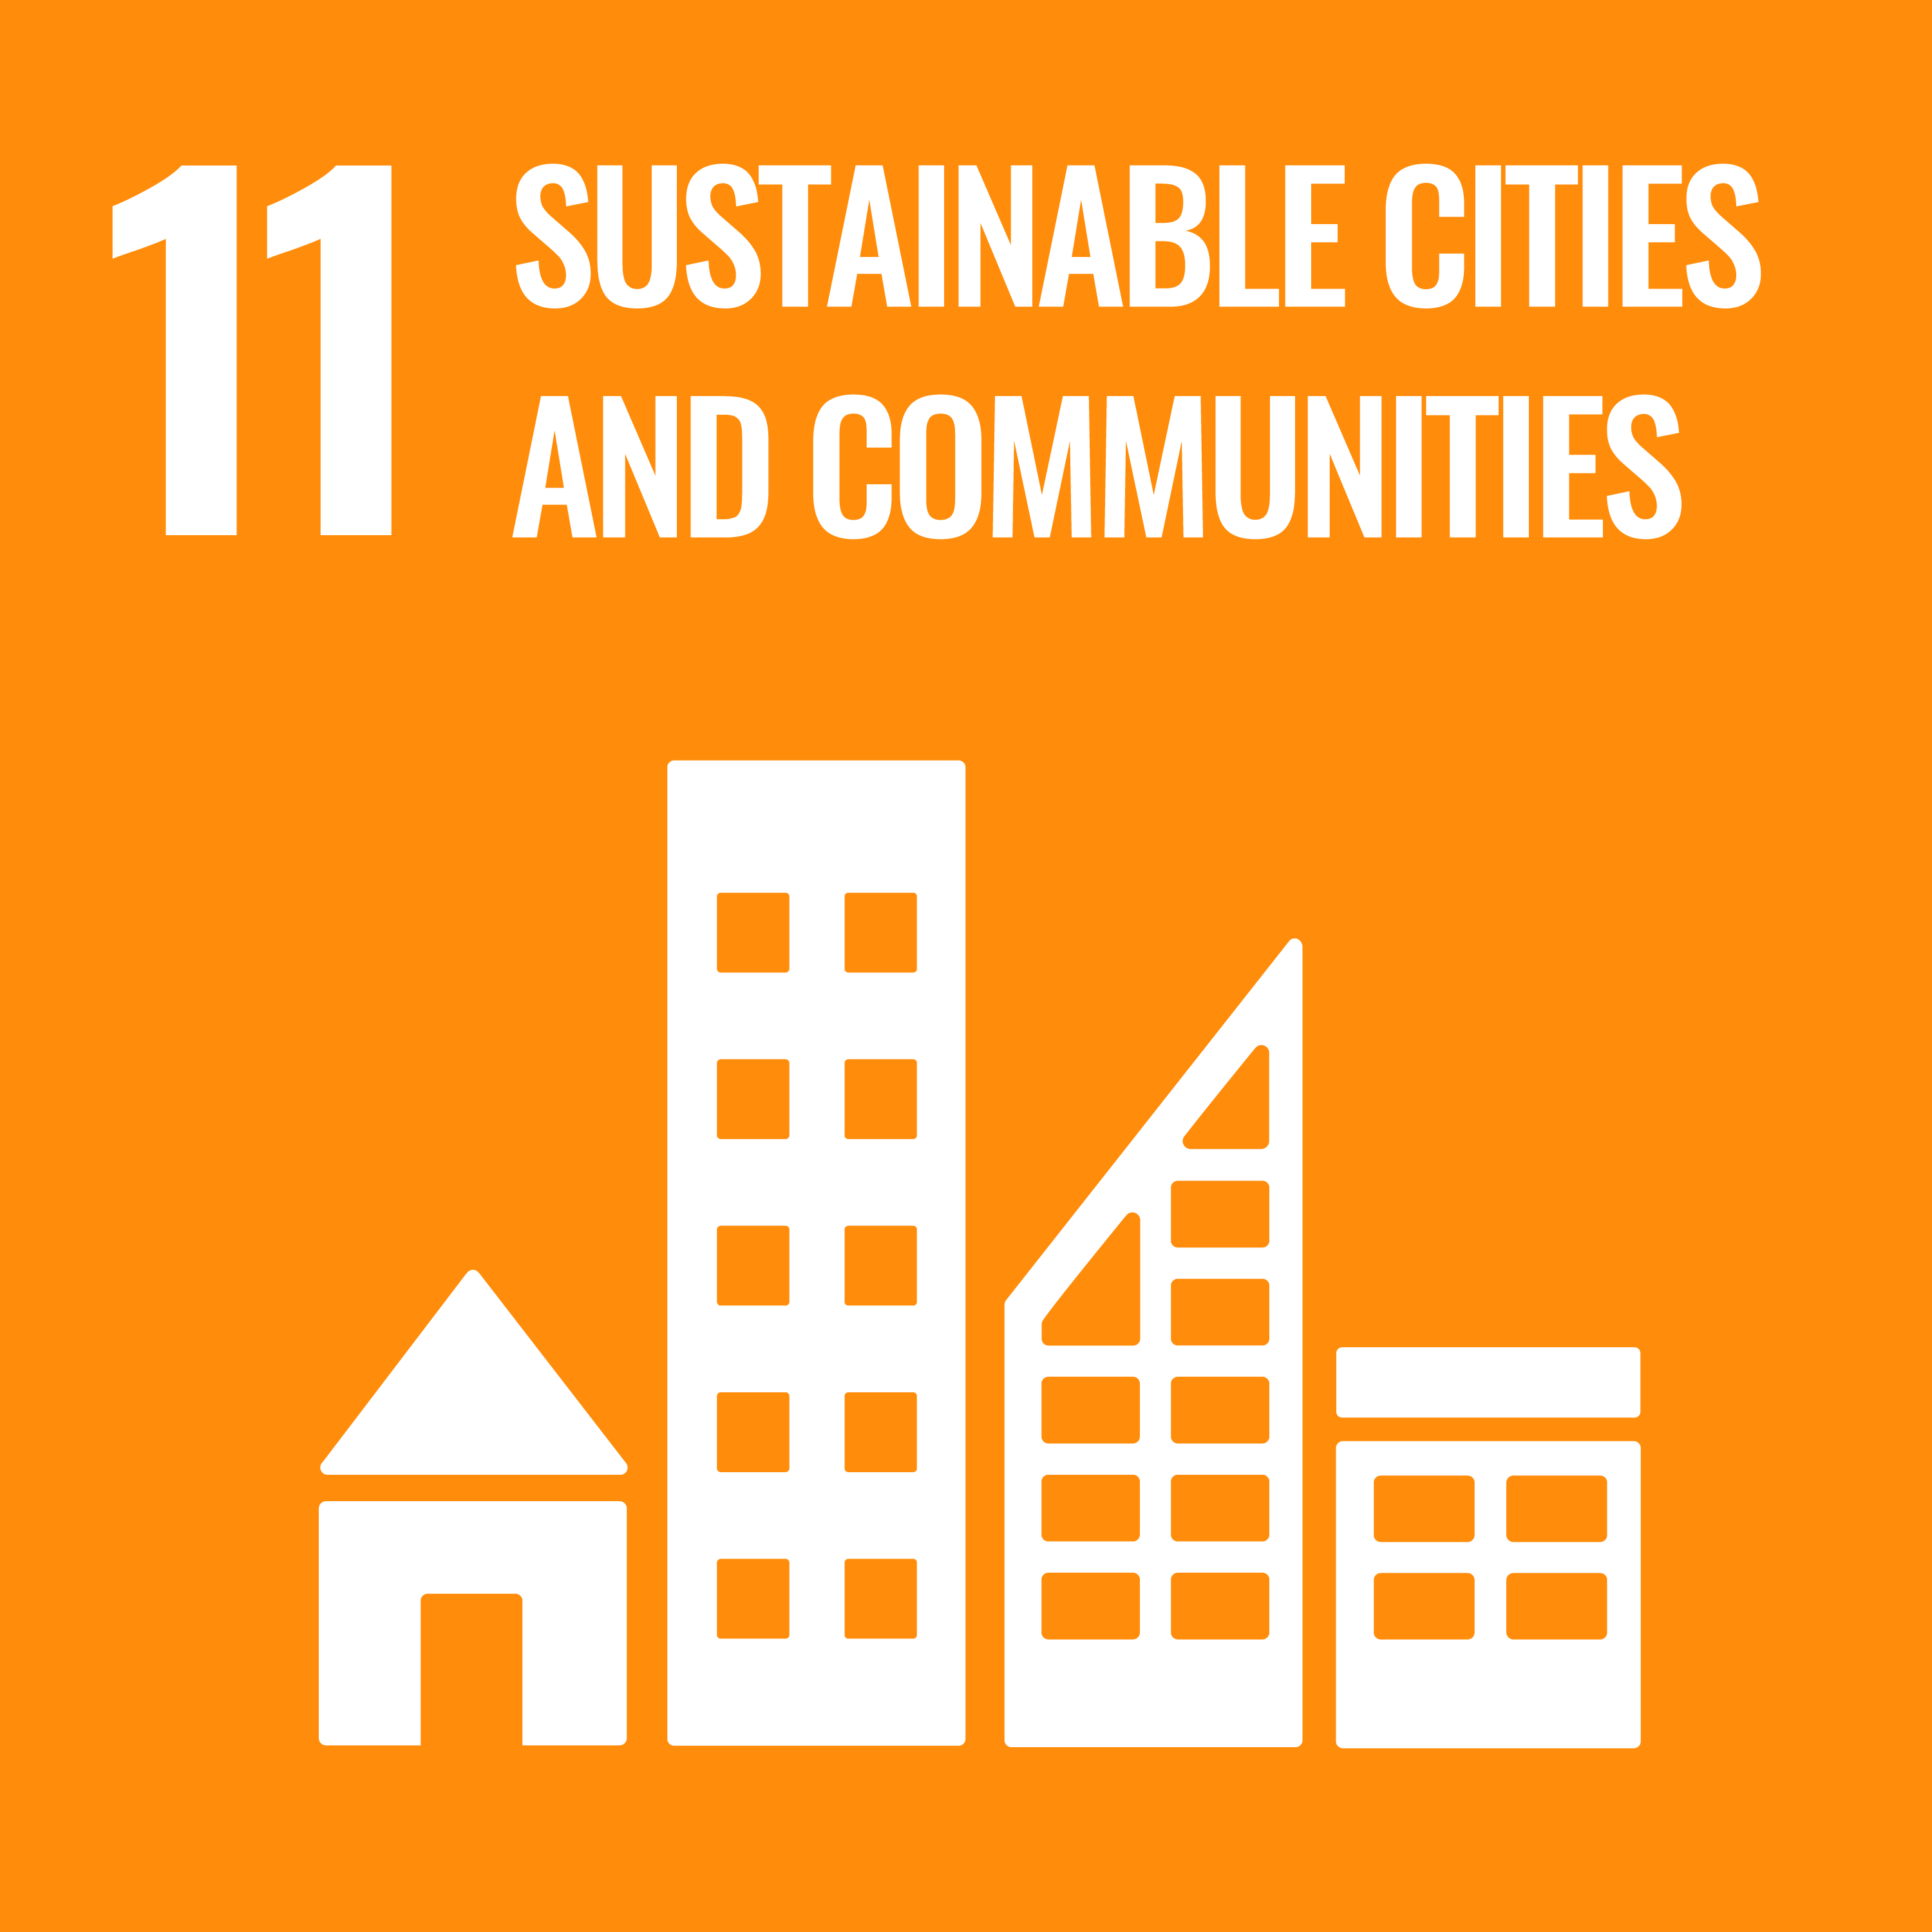 A yellow icon depicting four buildings and the text "11: Sustainable cities and communities"